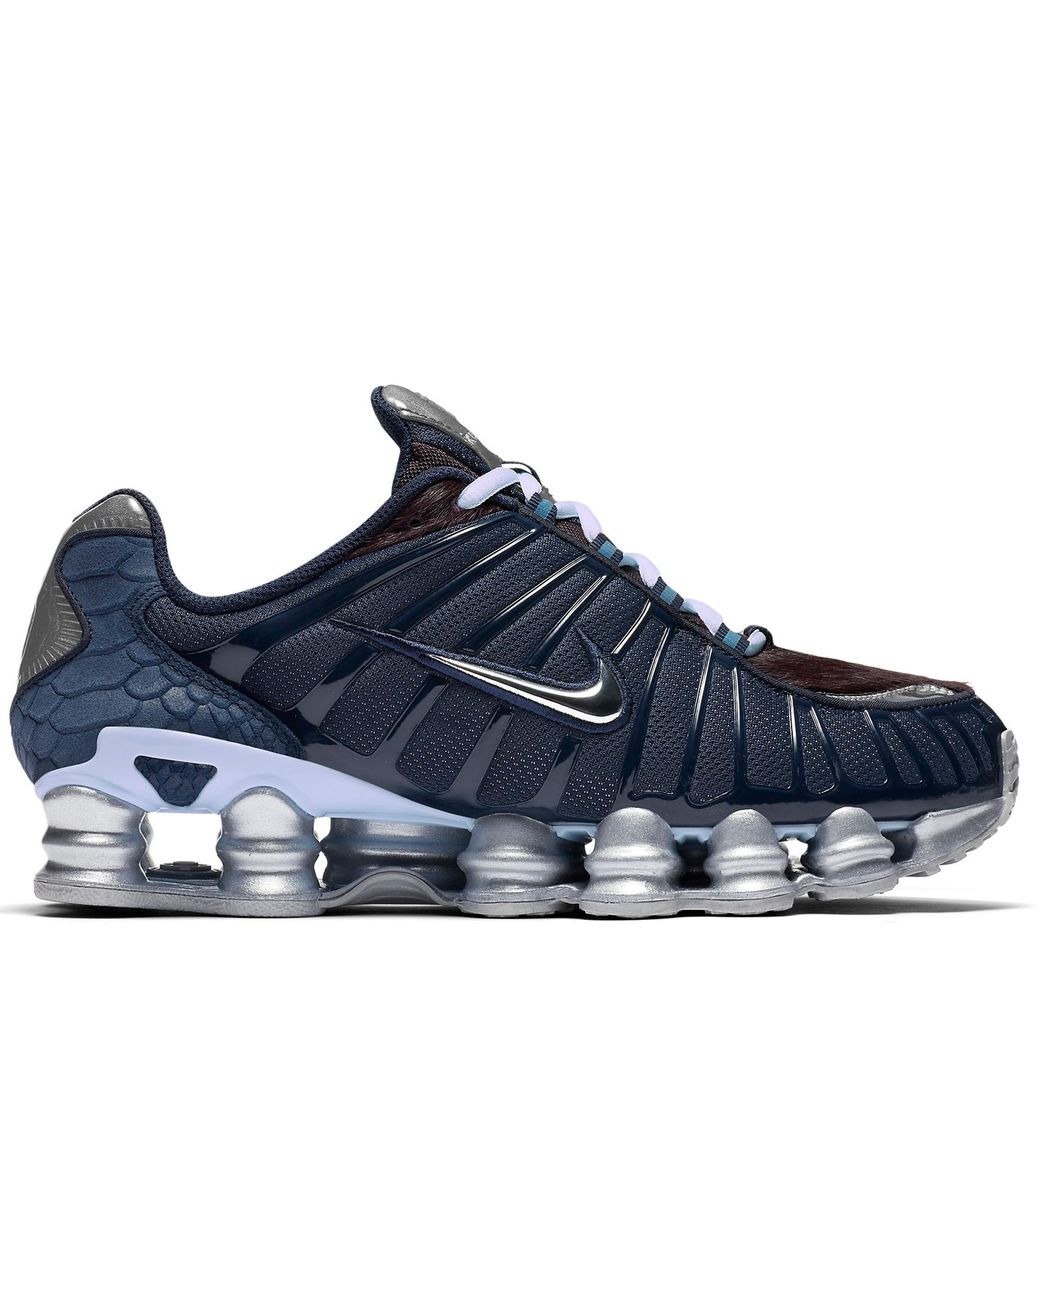 Nike Leather Shox Tl Shoe in Blue for Men - Save 21% - Lyst